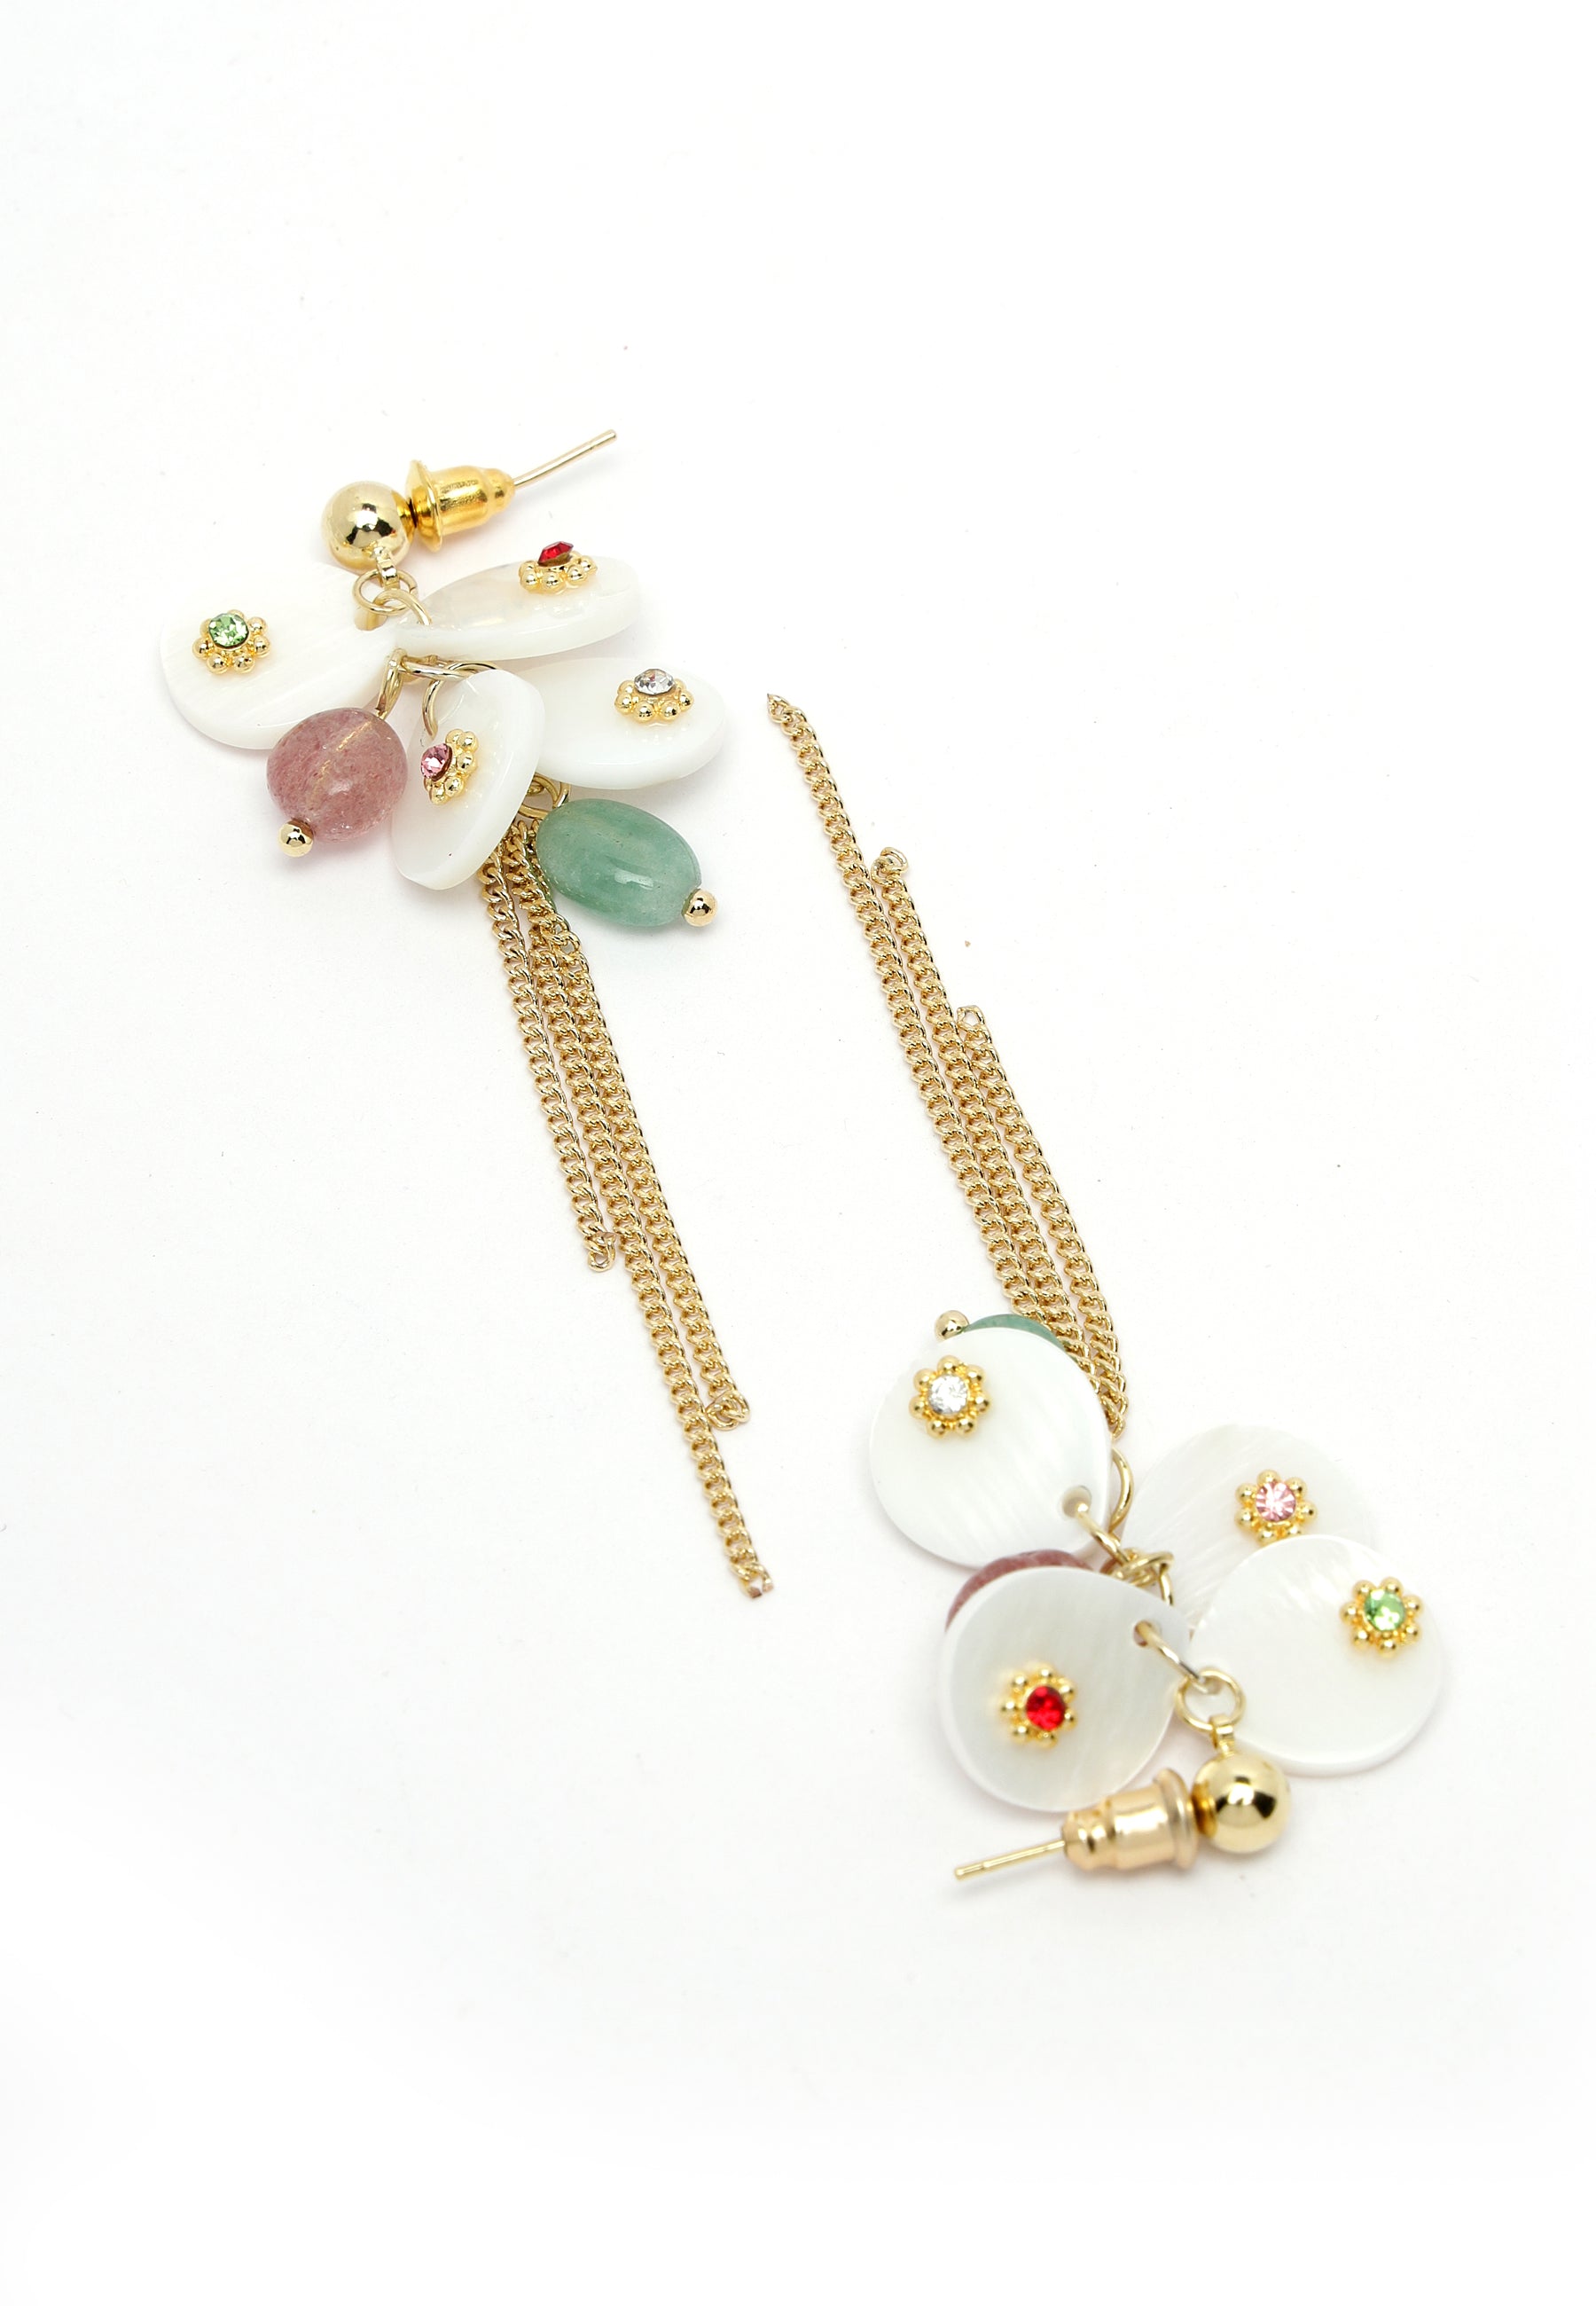 Gold-Colored Beaded Drop Earrings